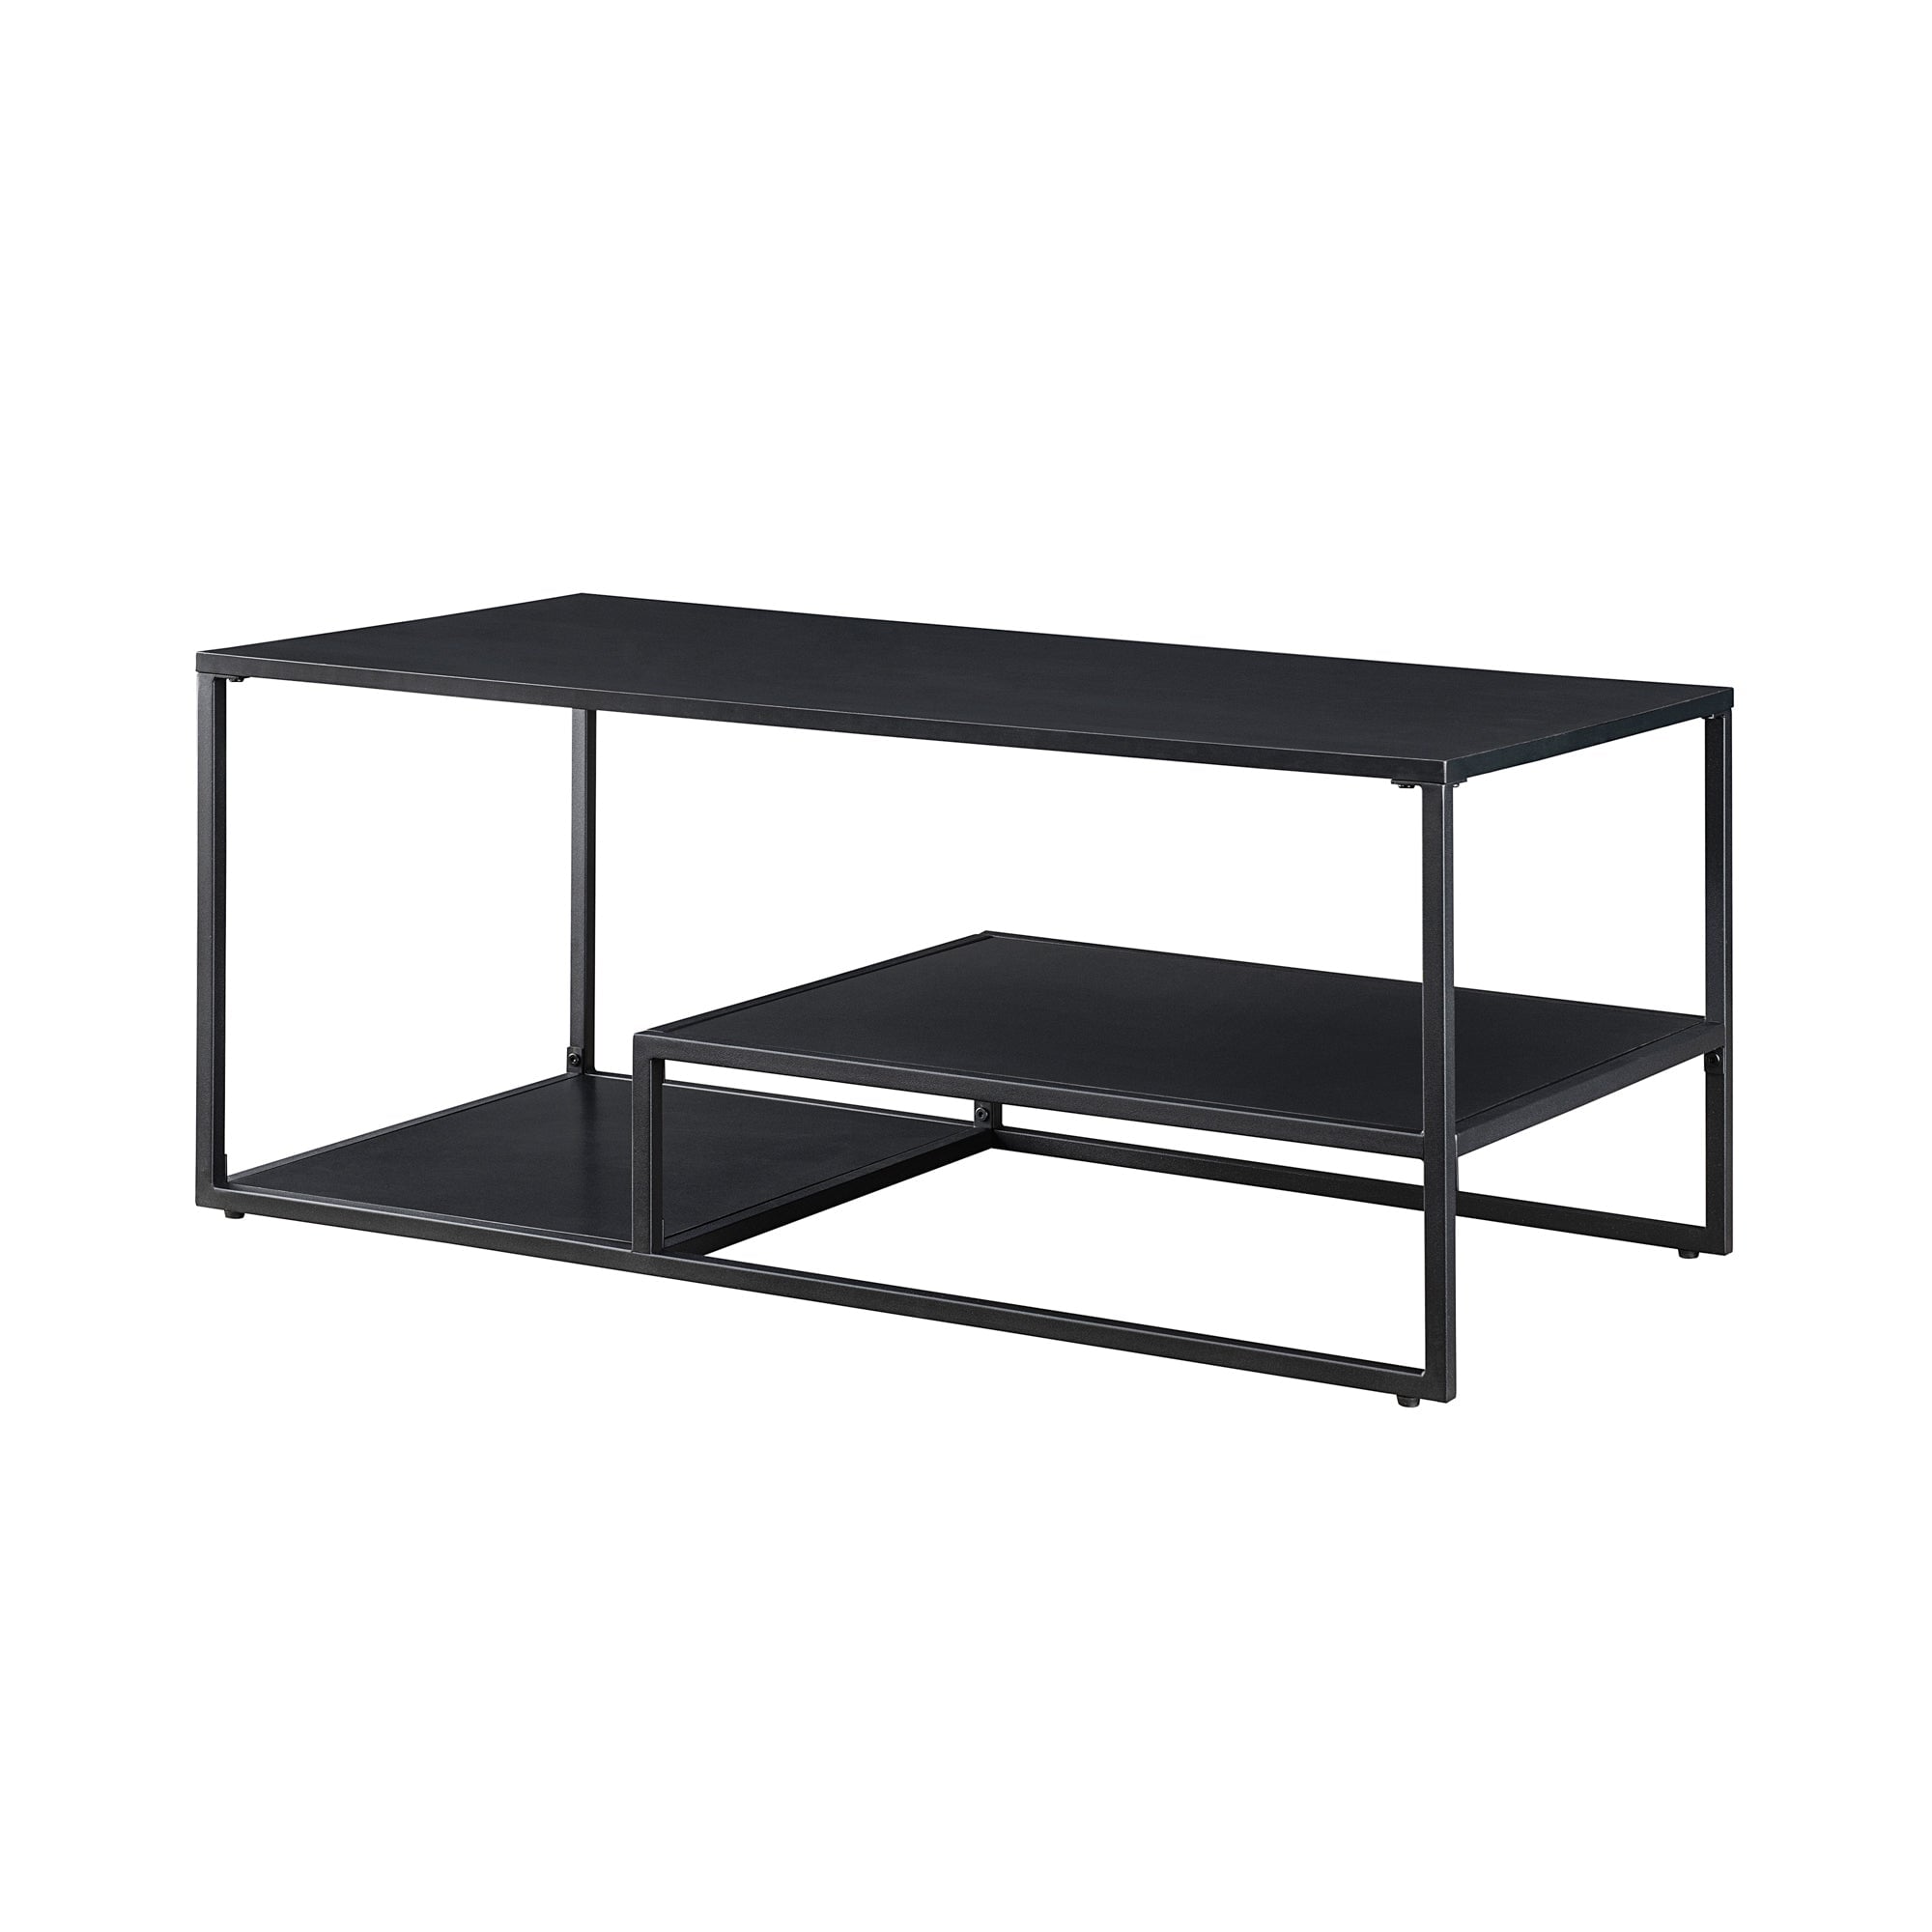 Fasi 40" Metal and Wood Coffee Table with Tiered Shelves